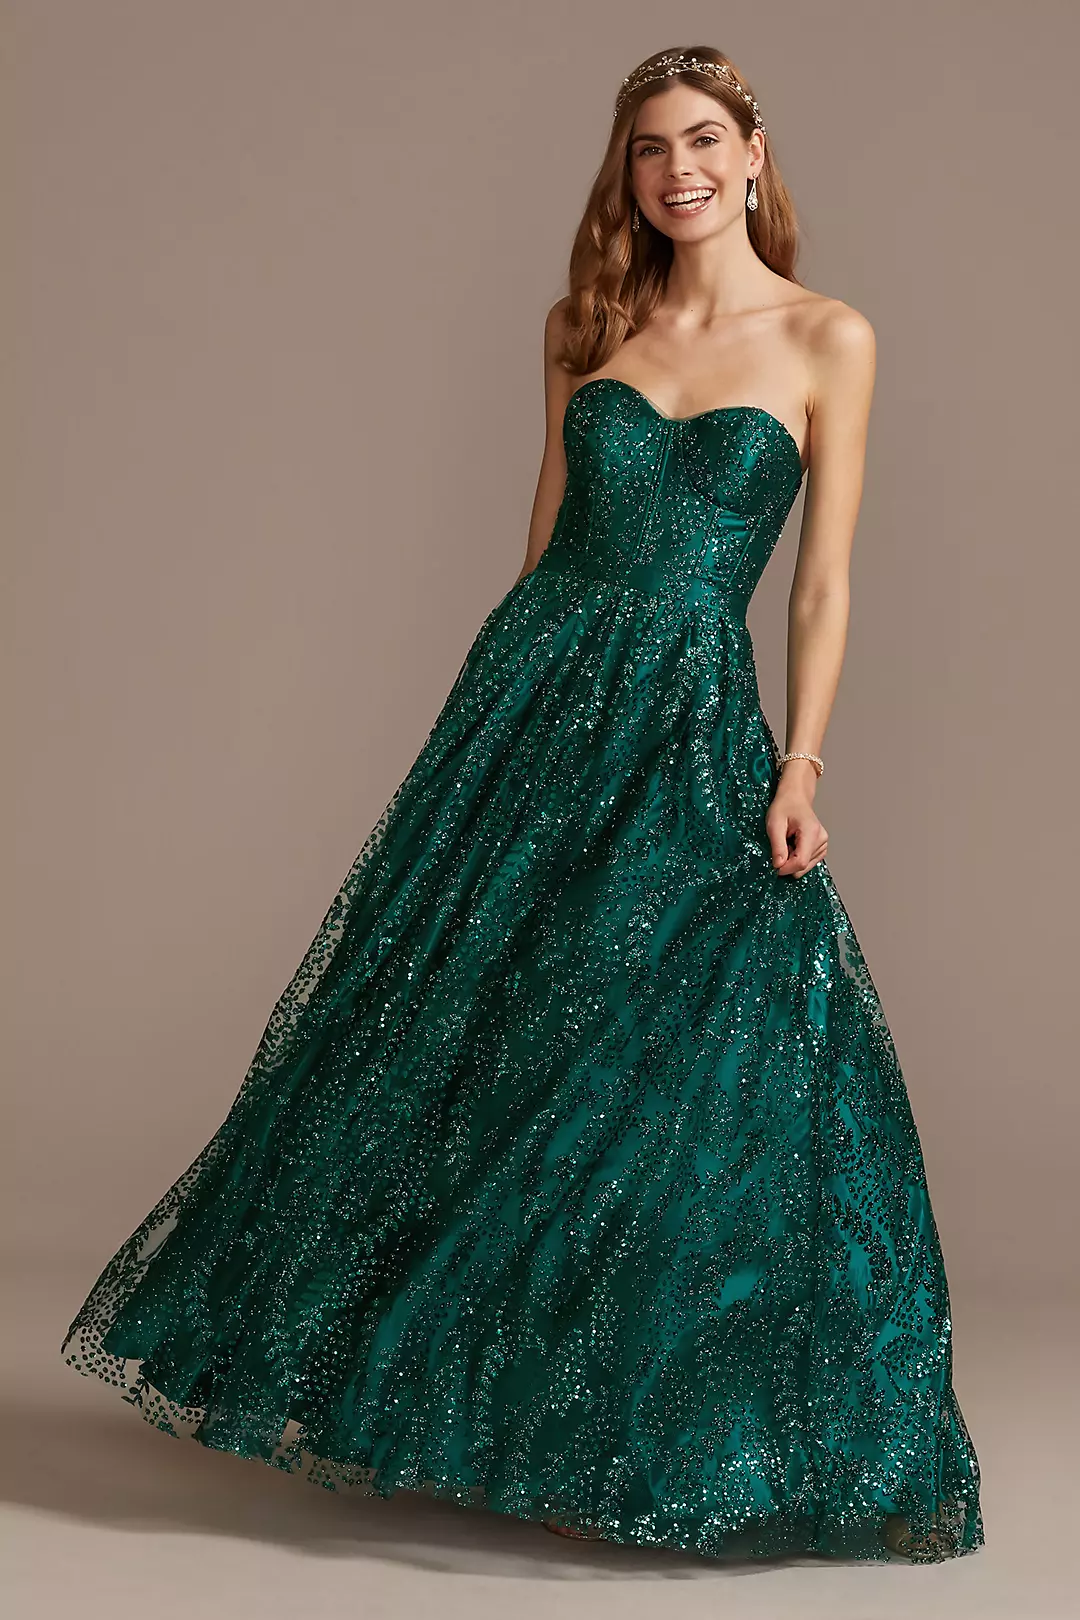 Corset Bodice Strapless Gown with Glitter Overlay Image